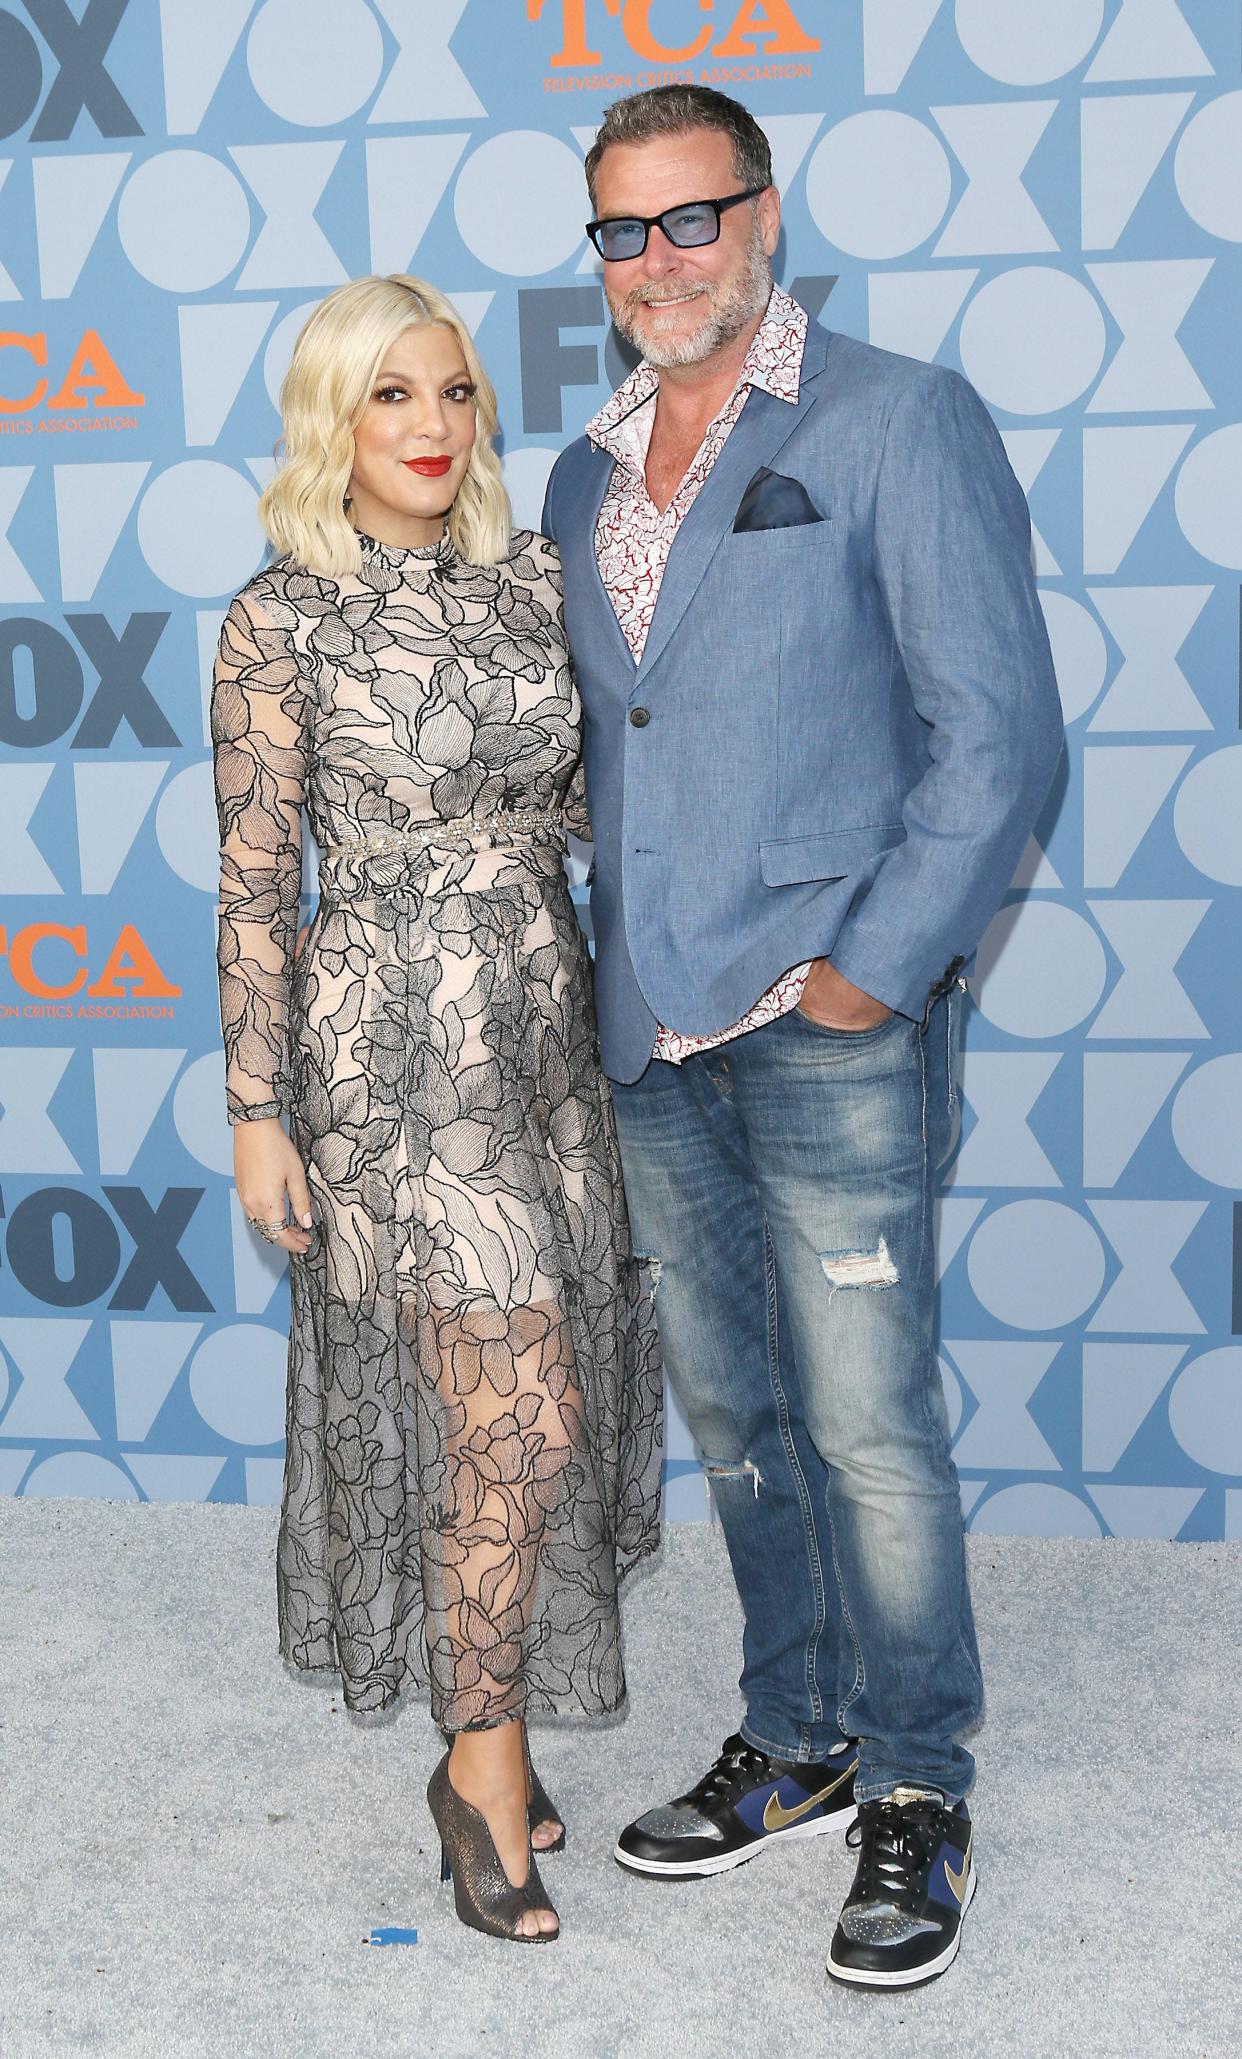 Tori Spelling and Dean McDermott attend the FOX Summer TCA 2019 All-Star Party at Fox Studios on Aug. 7, 2019 in Los Angeles. In March 2024, Spelling filed for divorce from McDermott.